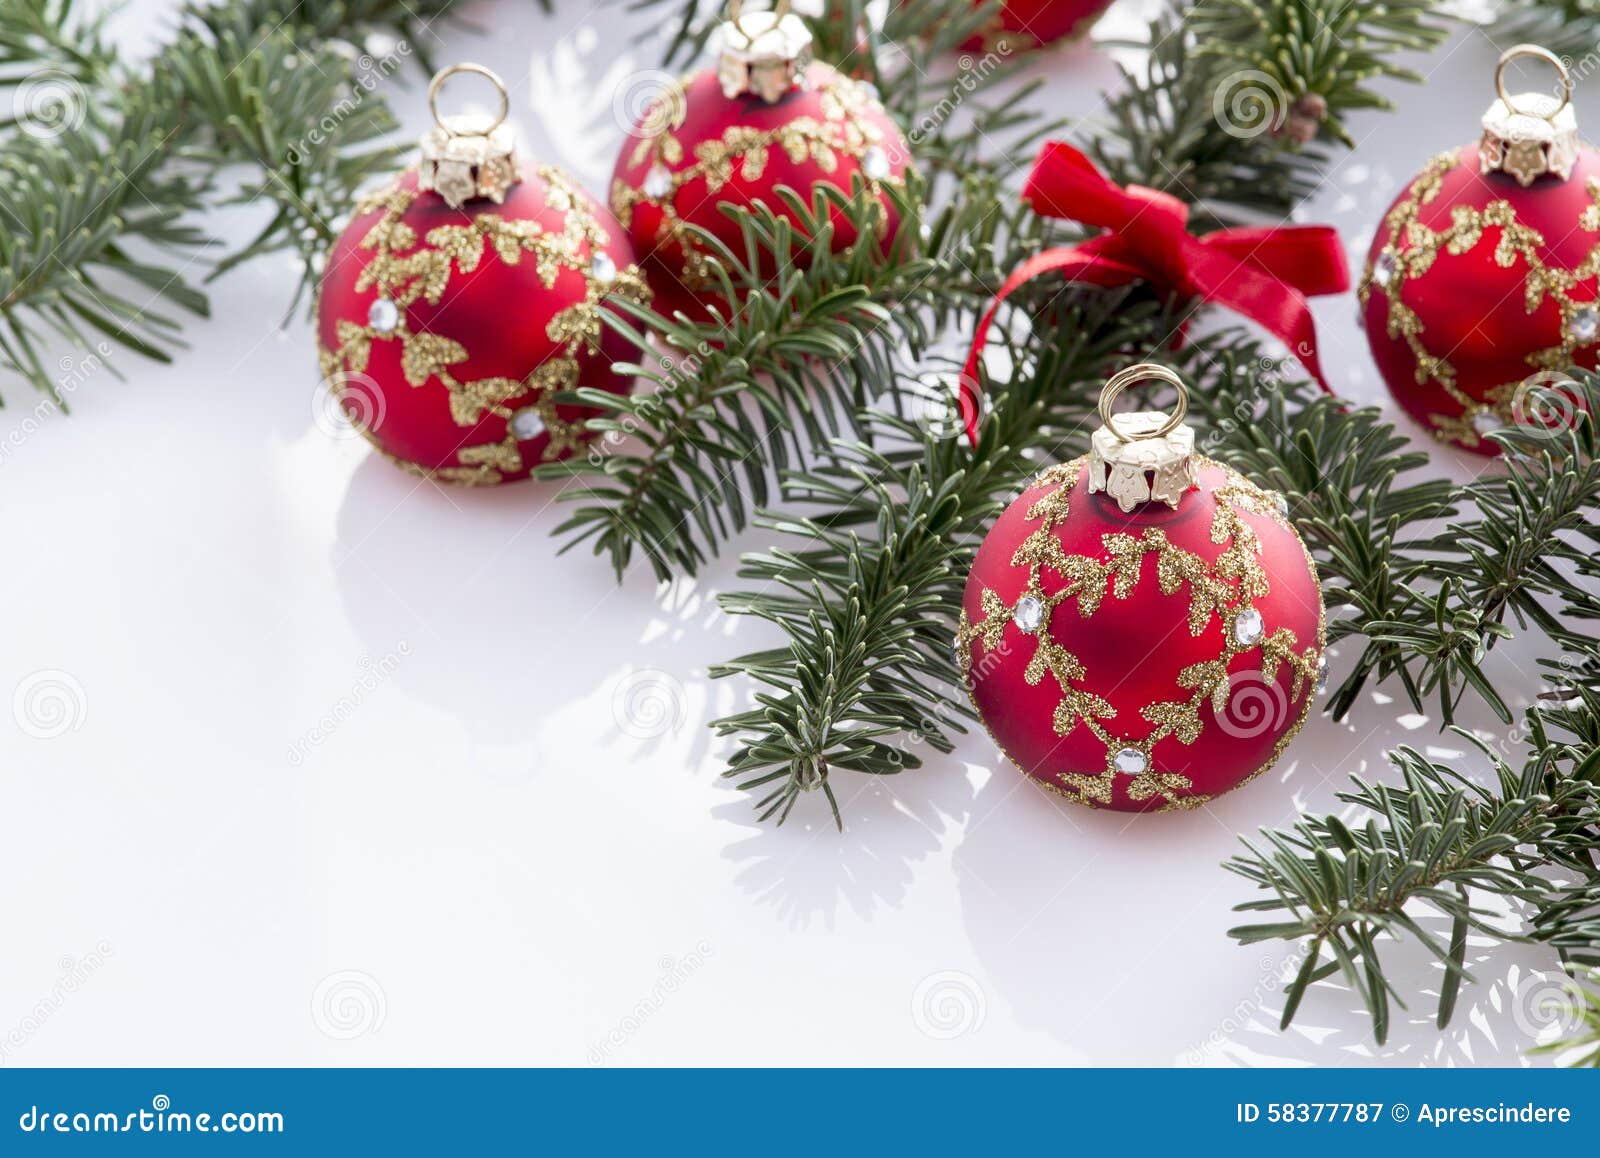 Red Christmas Ball Decorations Stock Image - Image of december, decor ...